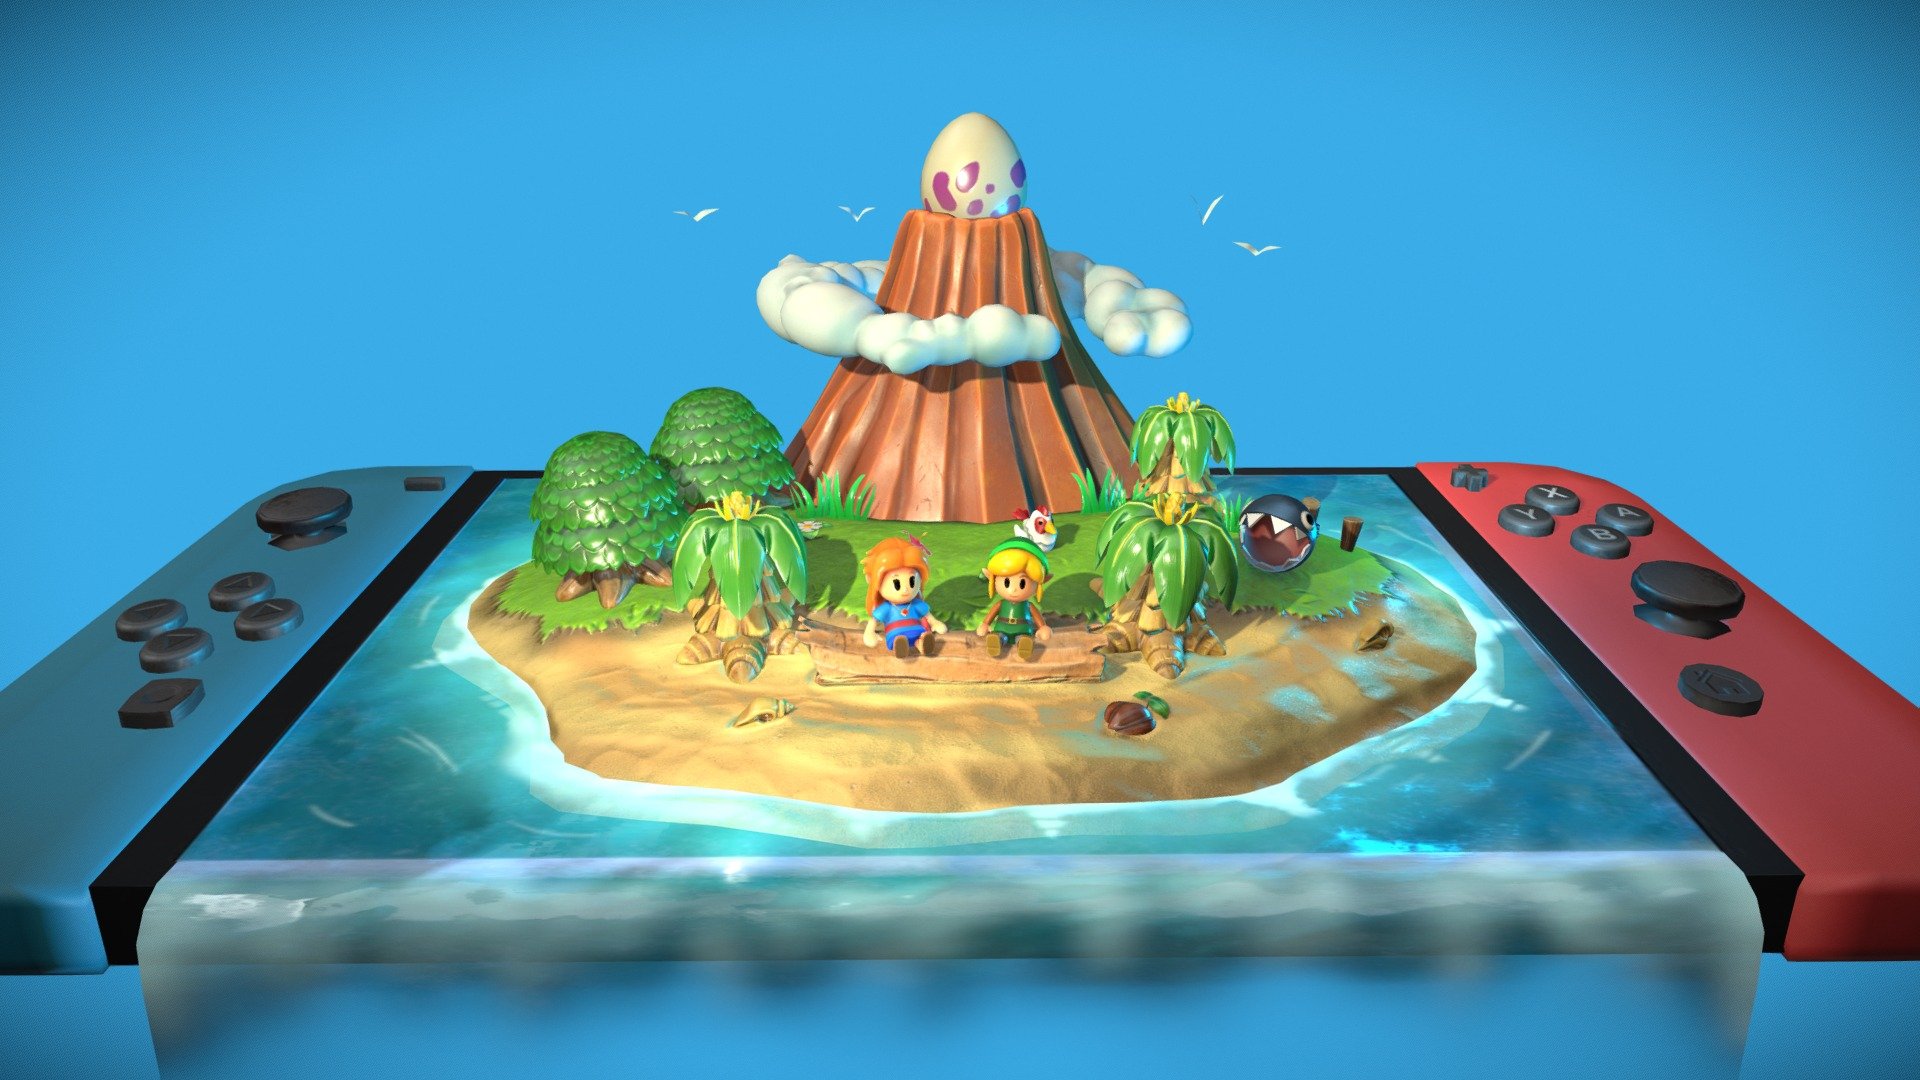 Here's a recreation of Koholint Island from Link's Awakening I made. Based on Ana Solana's illustration. 
I tried to replicate the toy mockup style used in the remake of said video game, from the glossy plastic finish of the shaders to the low poly geometries.
Modeled in Maya and textured in Substance 3d model